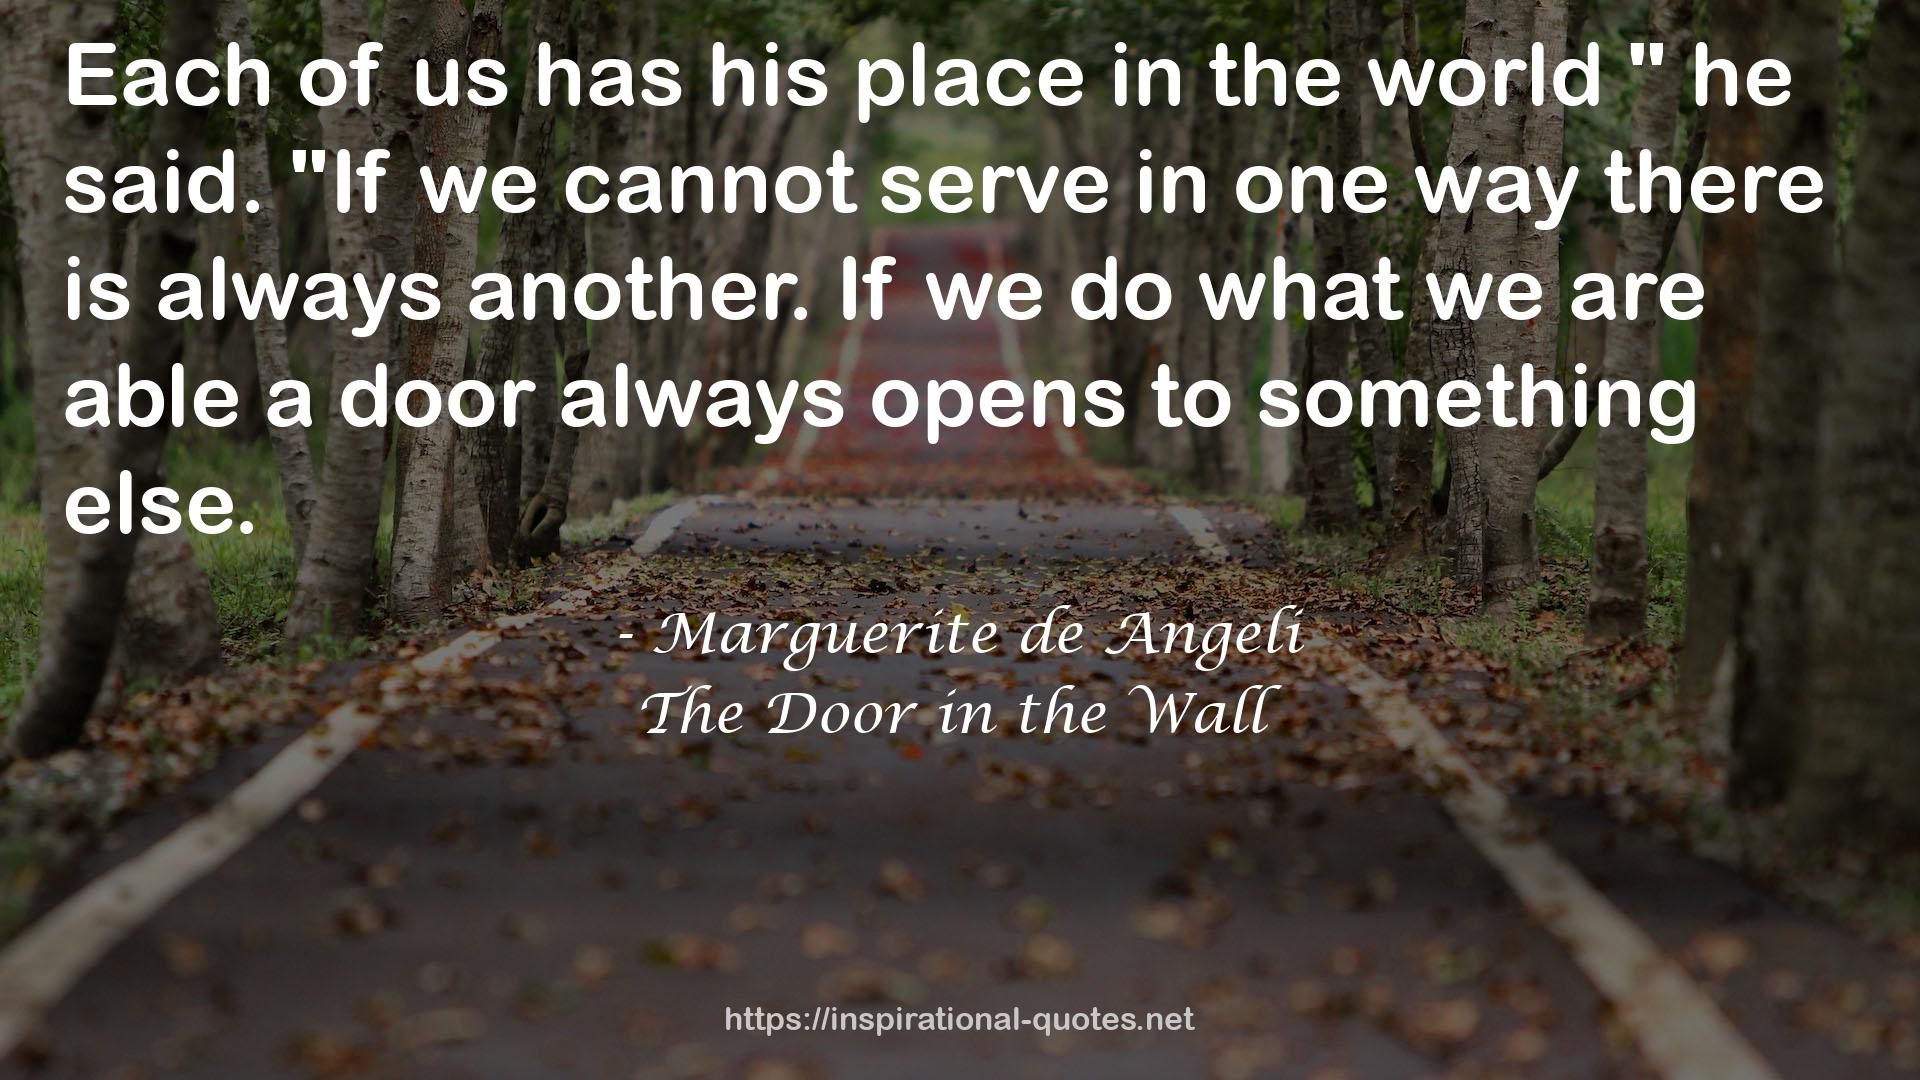 The Door in the Wall QUOTES